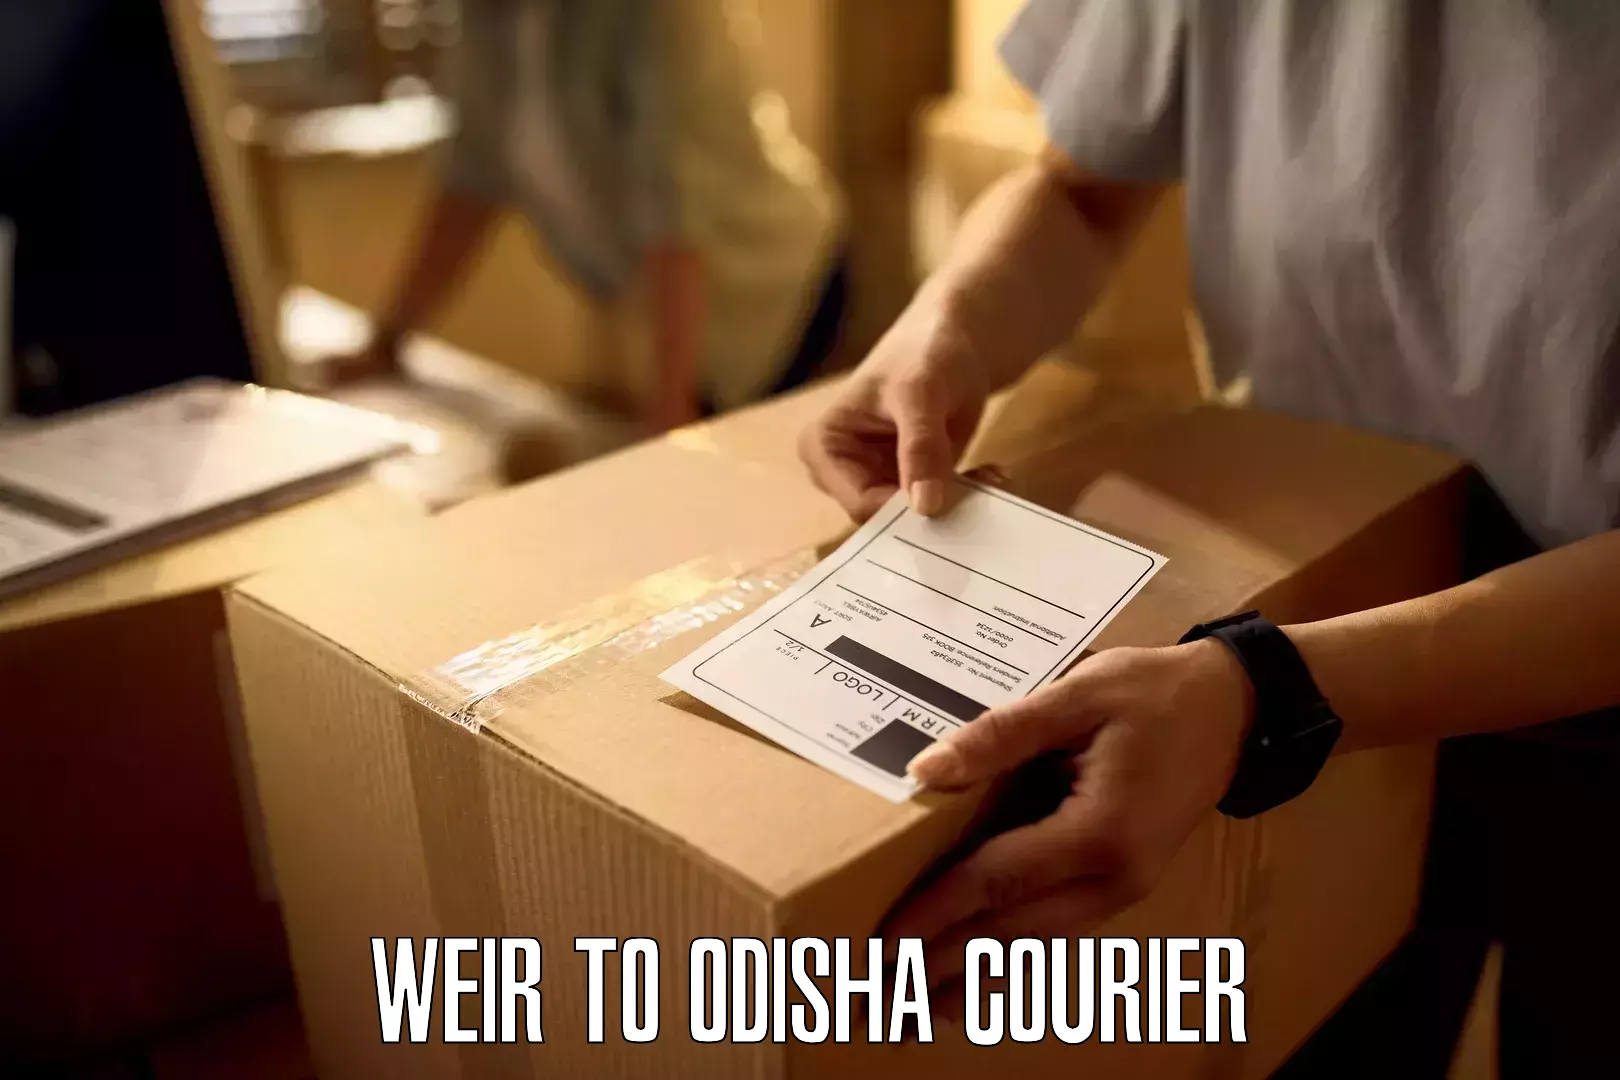 International courier rates Weir to Sohela